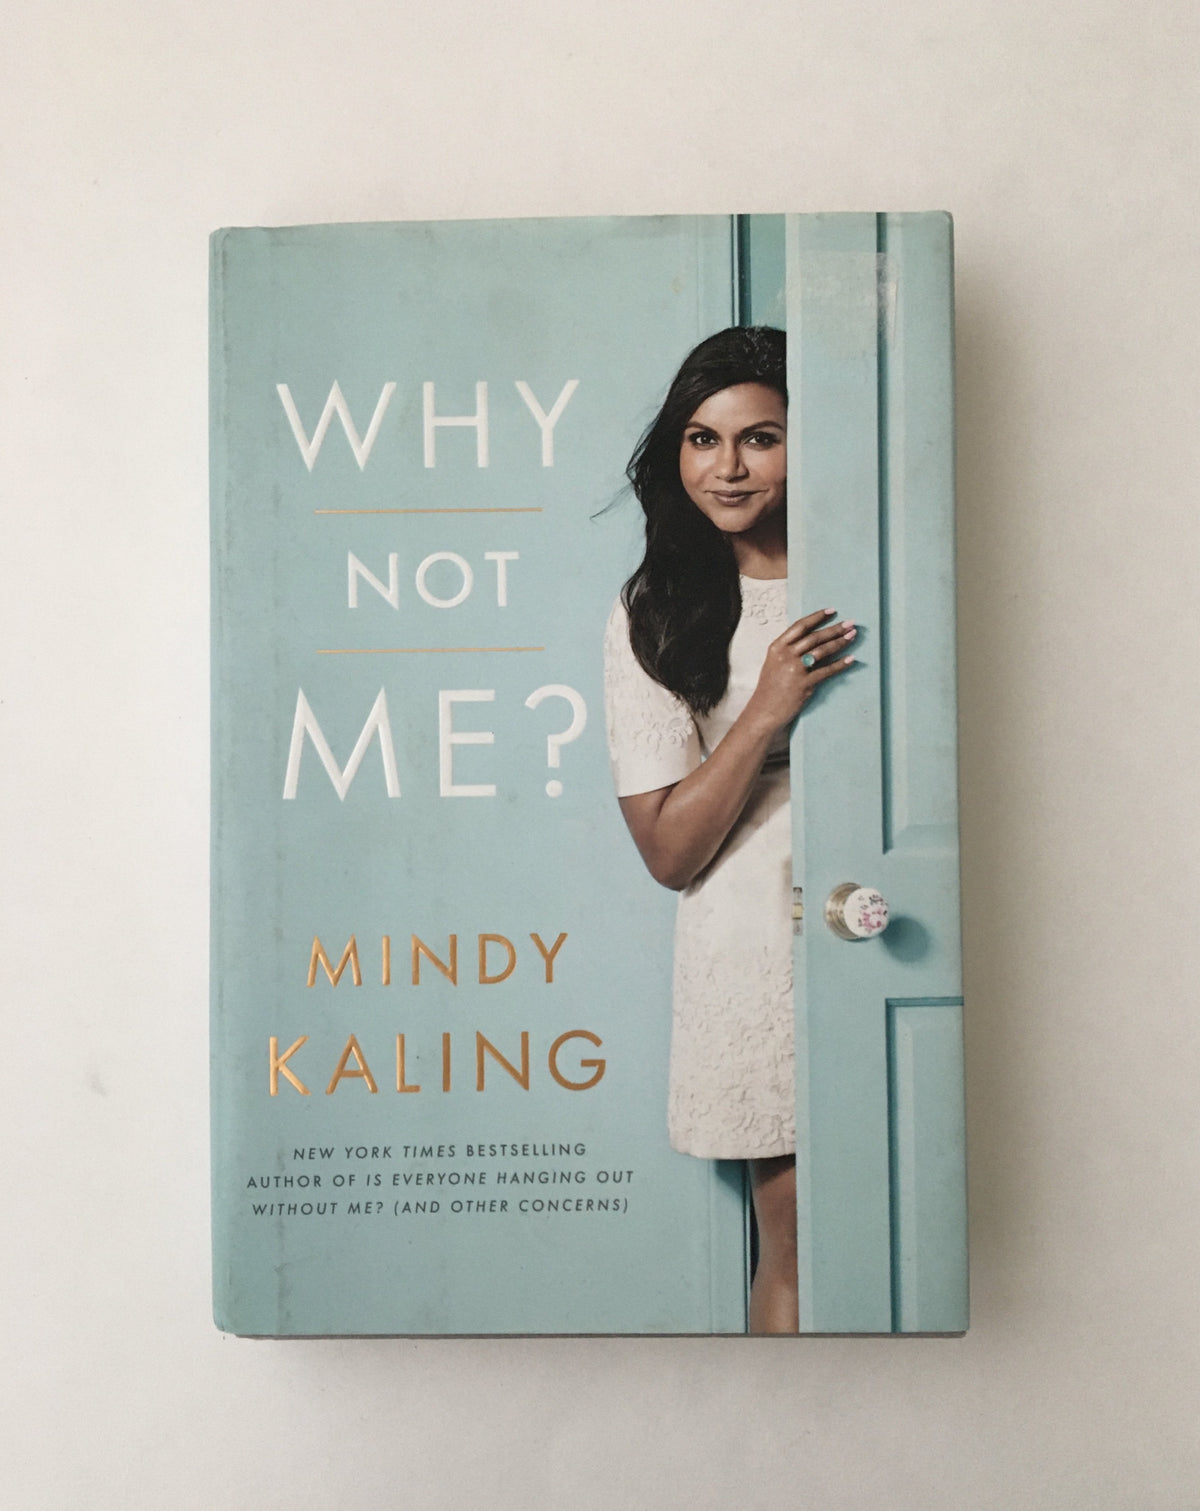 Why Not Me? by Mindy Kaling